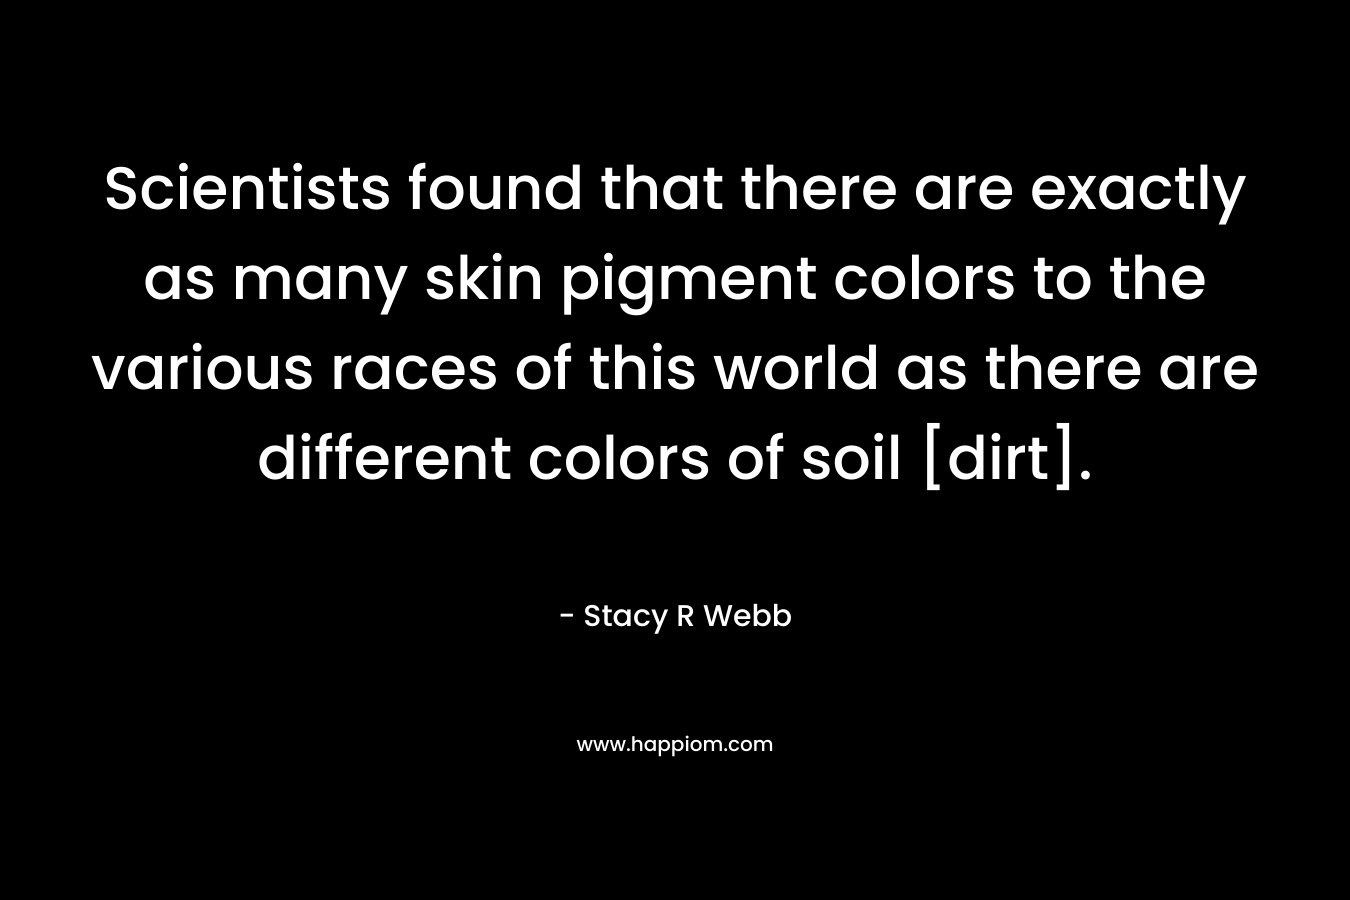 Scientists found that there are exactly as many skin pigment colors to the various races of this world as there are different colors of soil [dirt].